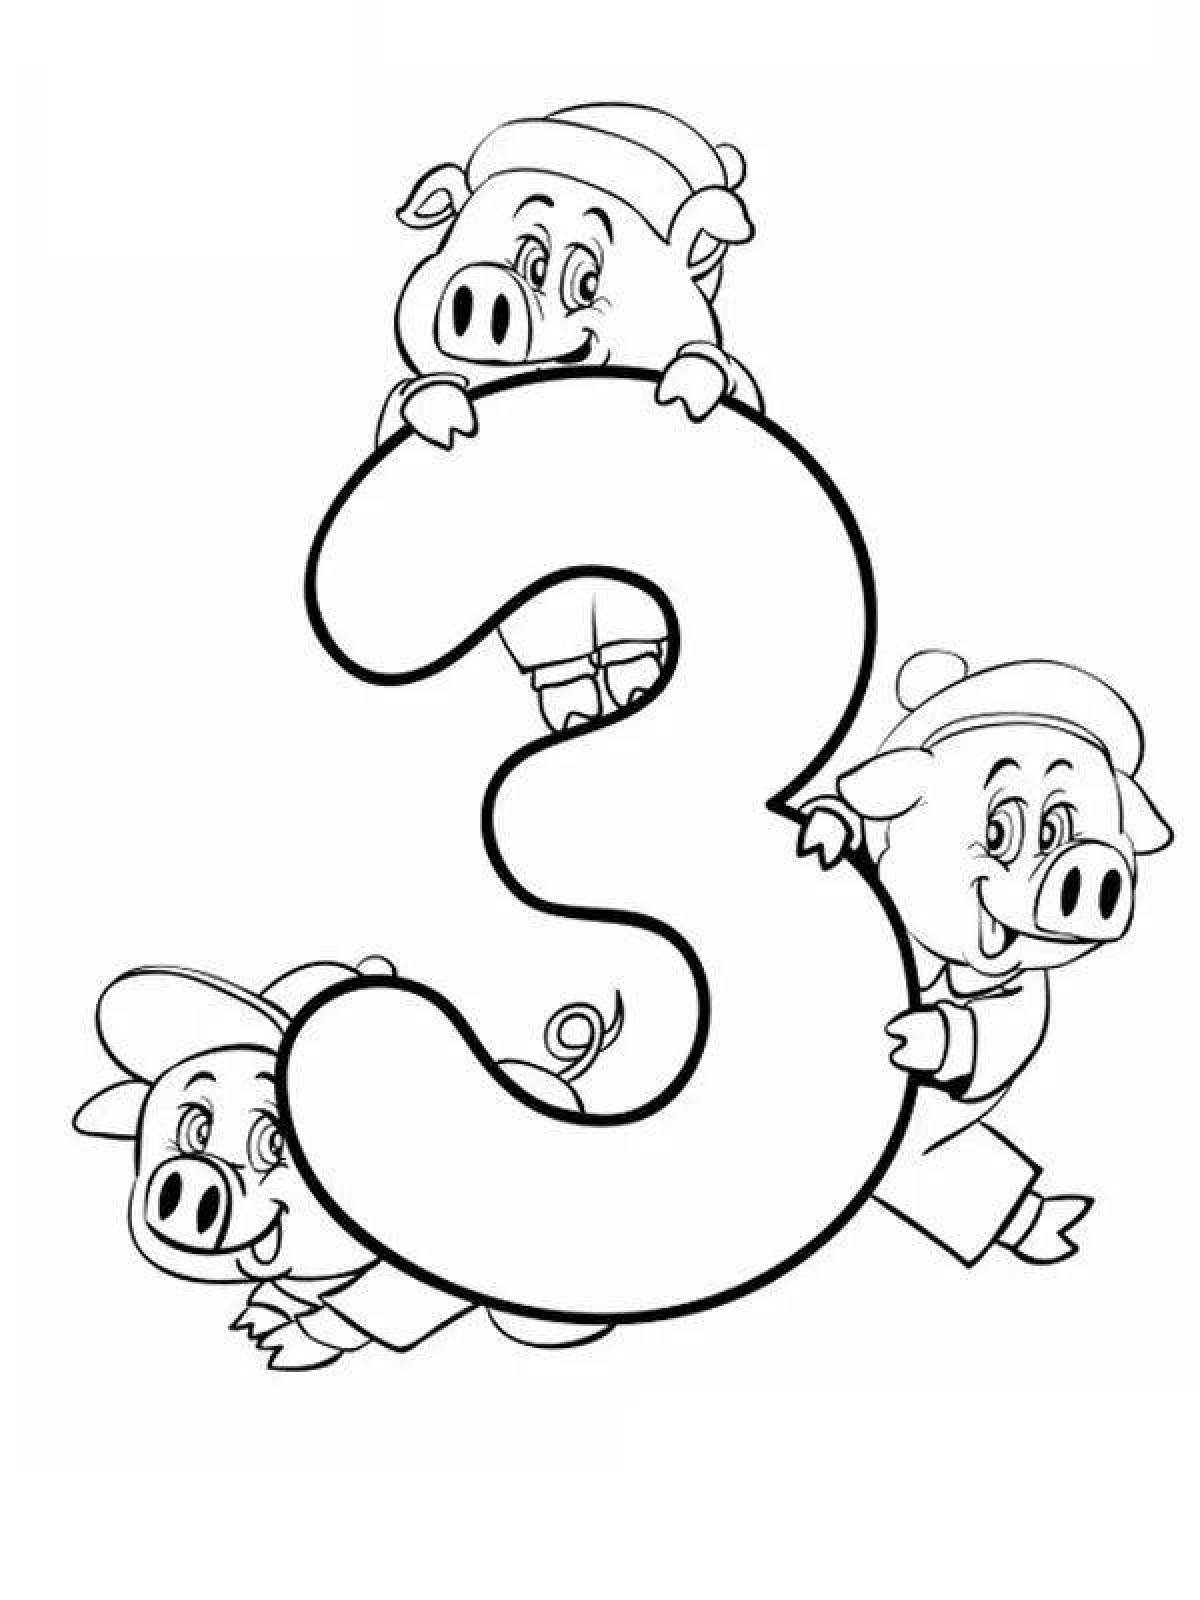 Fun coloring number 3 for kids